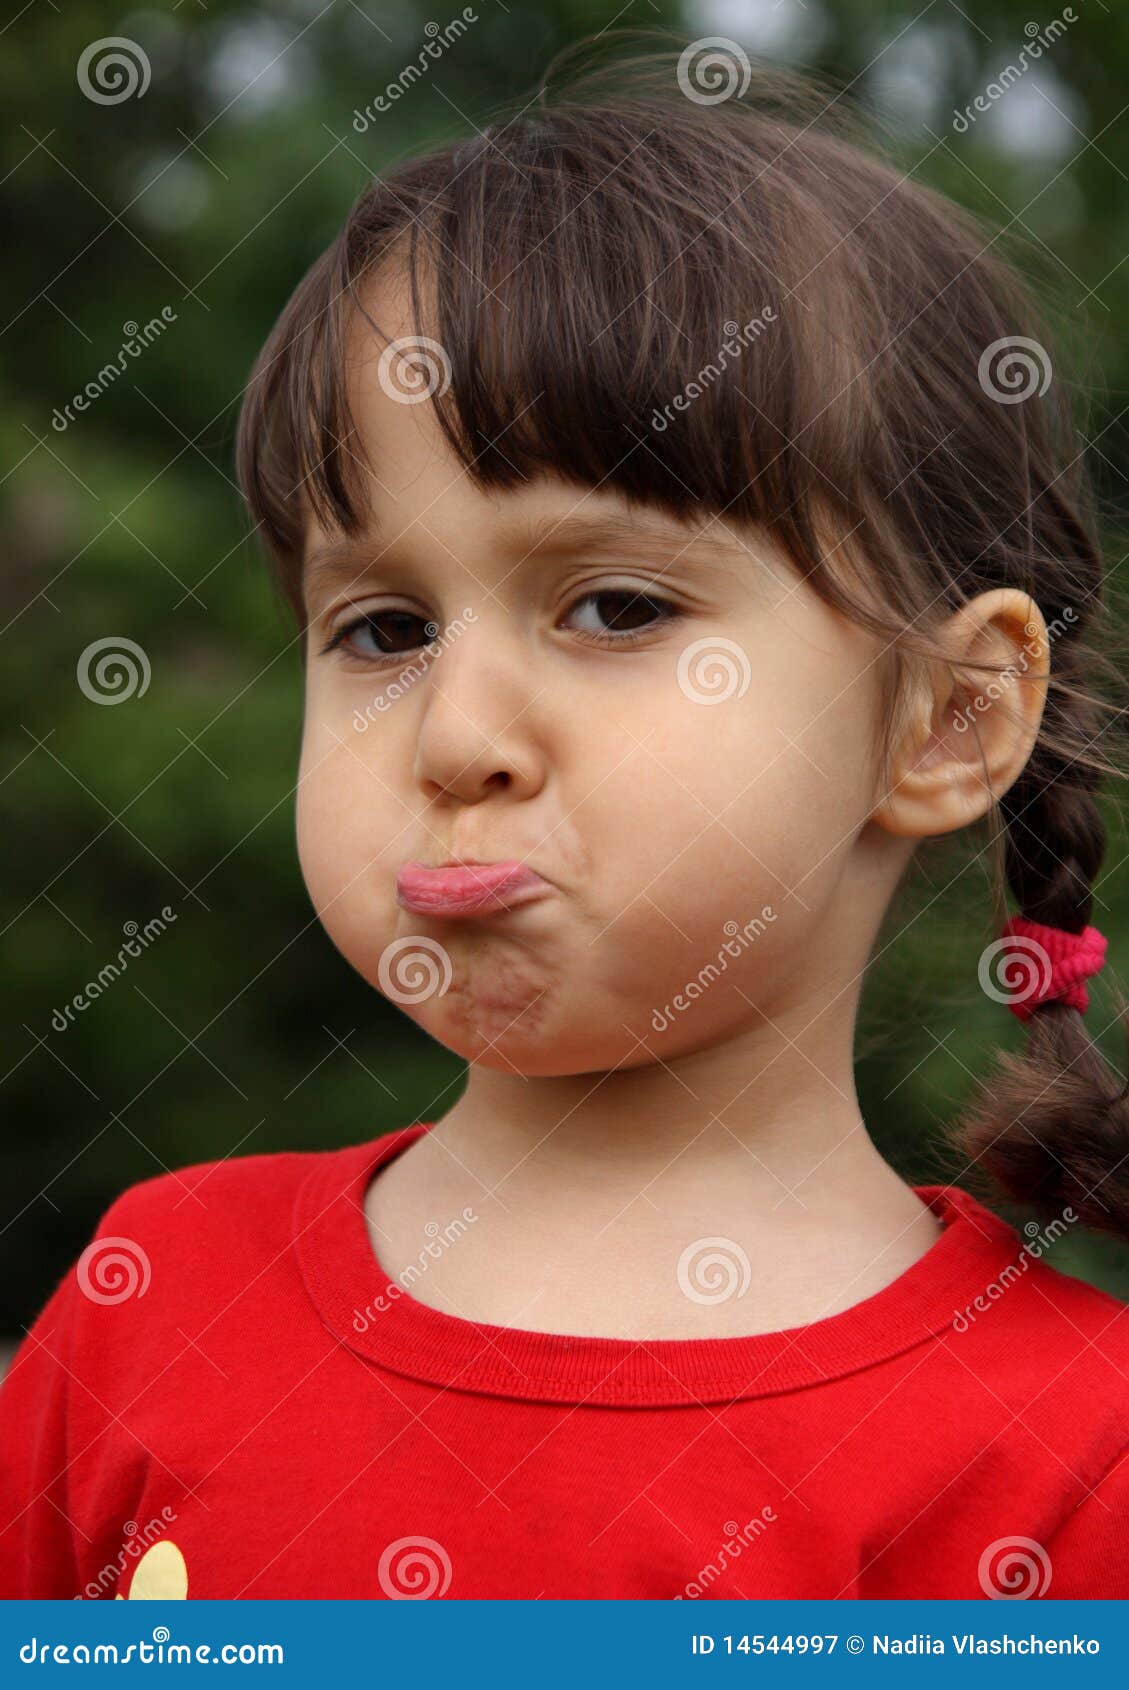 Little Girl Making Funny Face Stock Image - Image of head, looking: 14544997